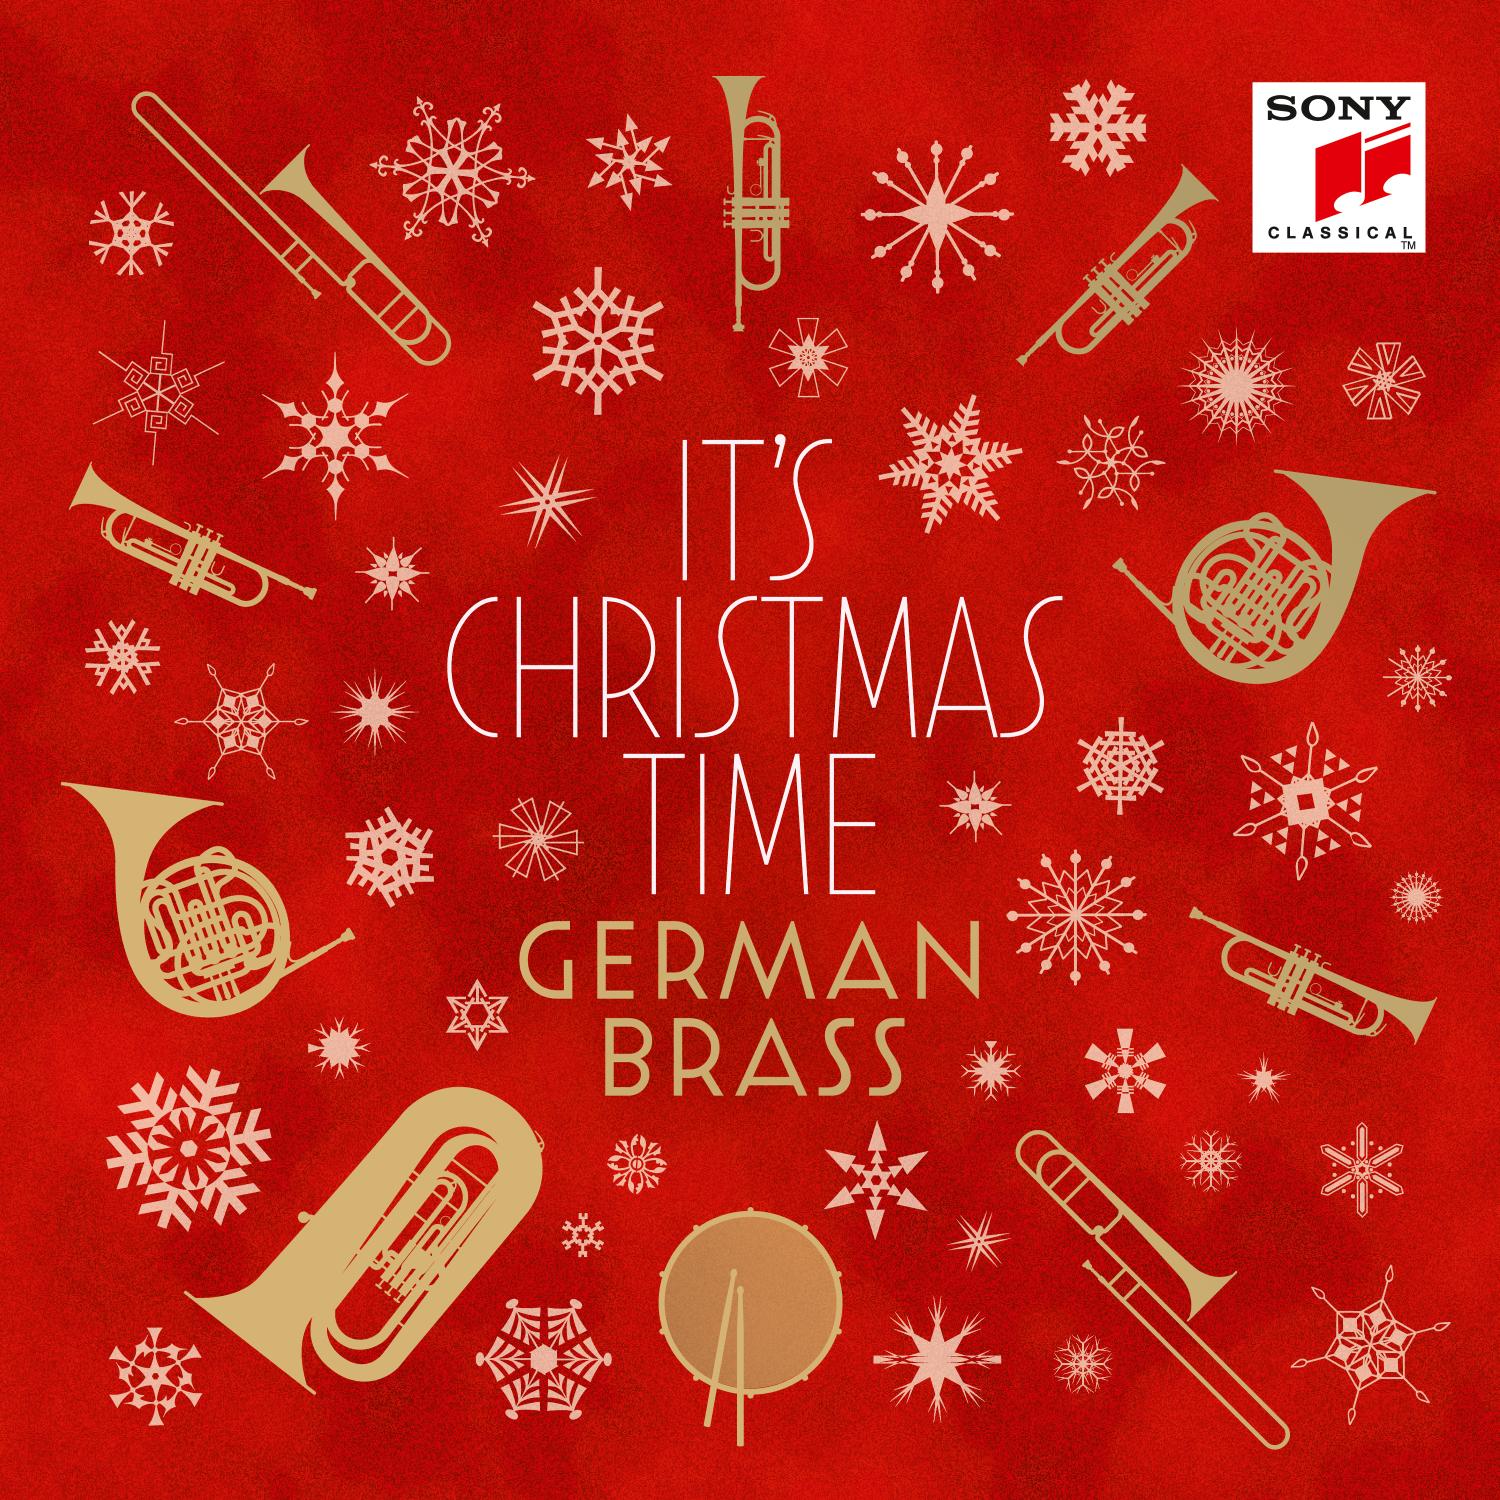 German Brass Its Christmas Time